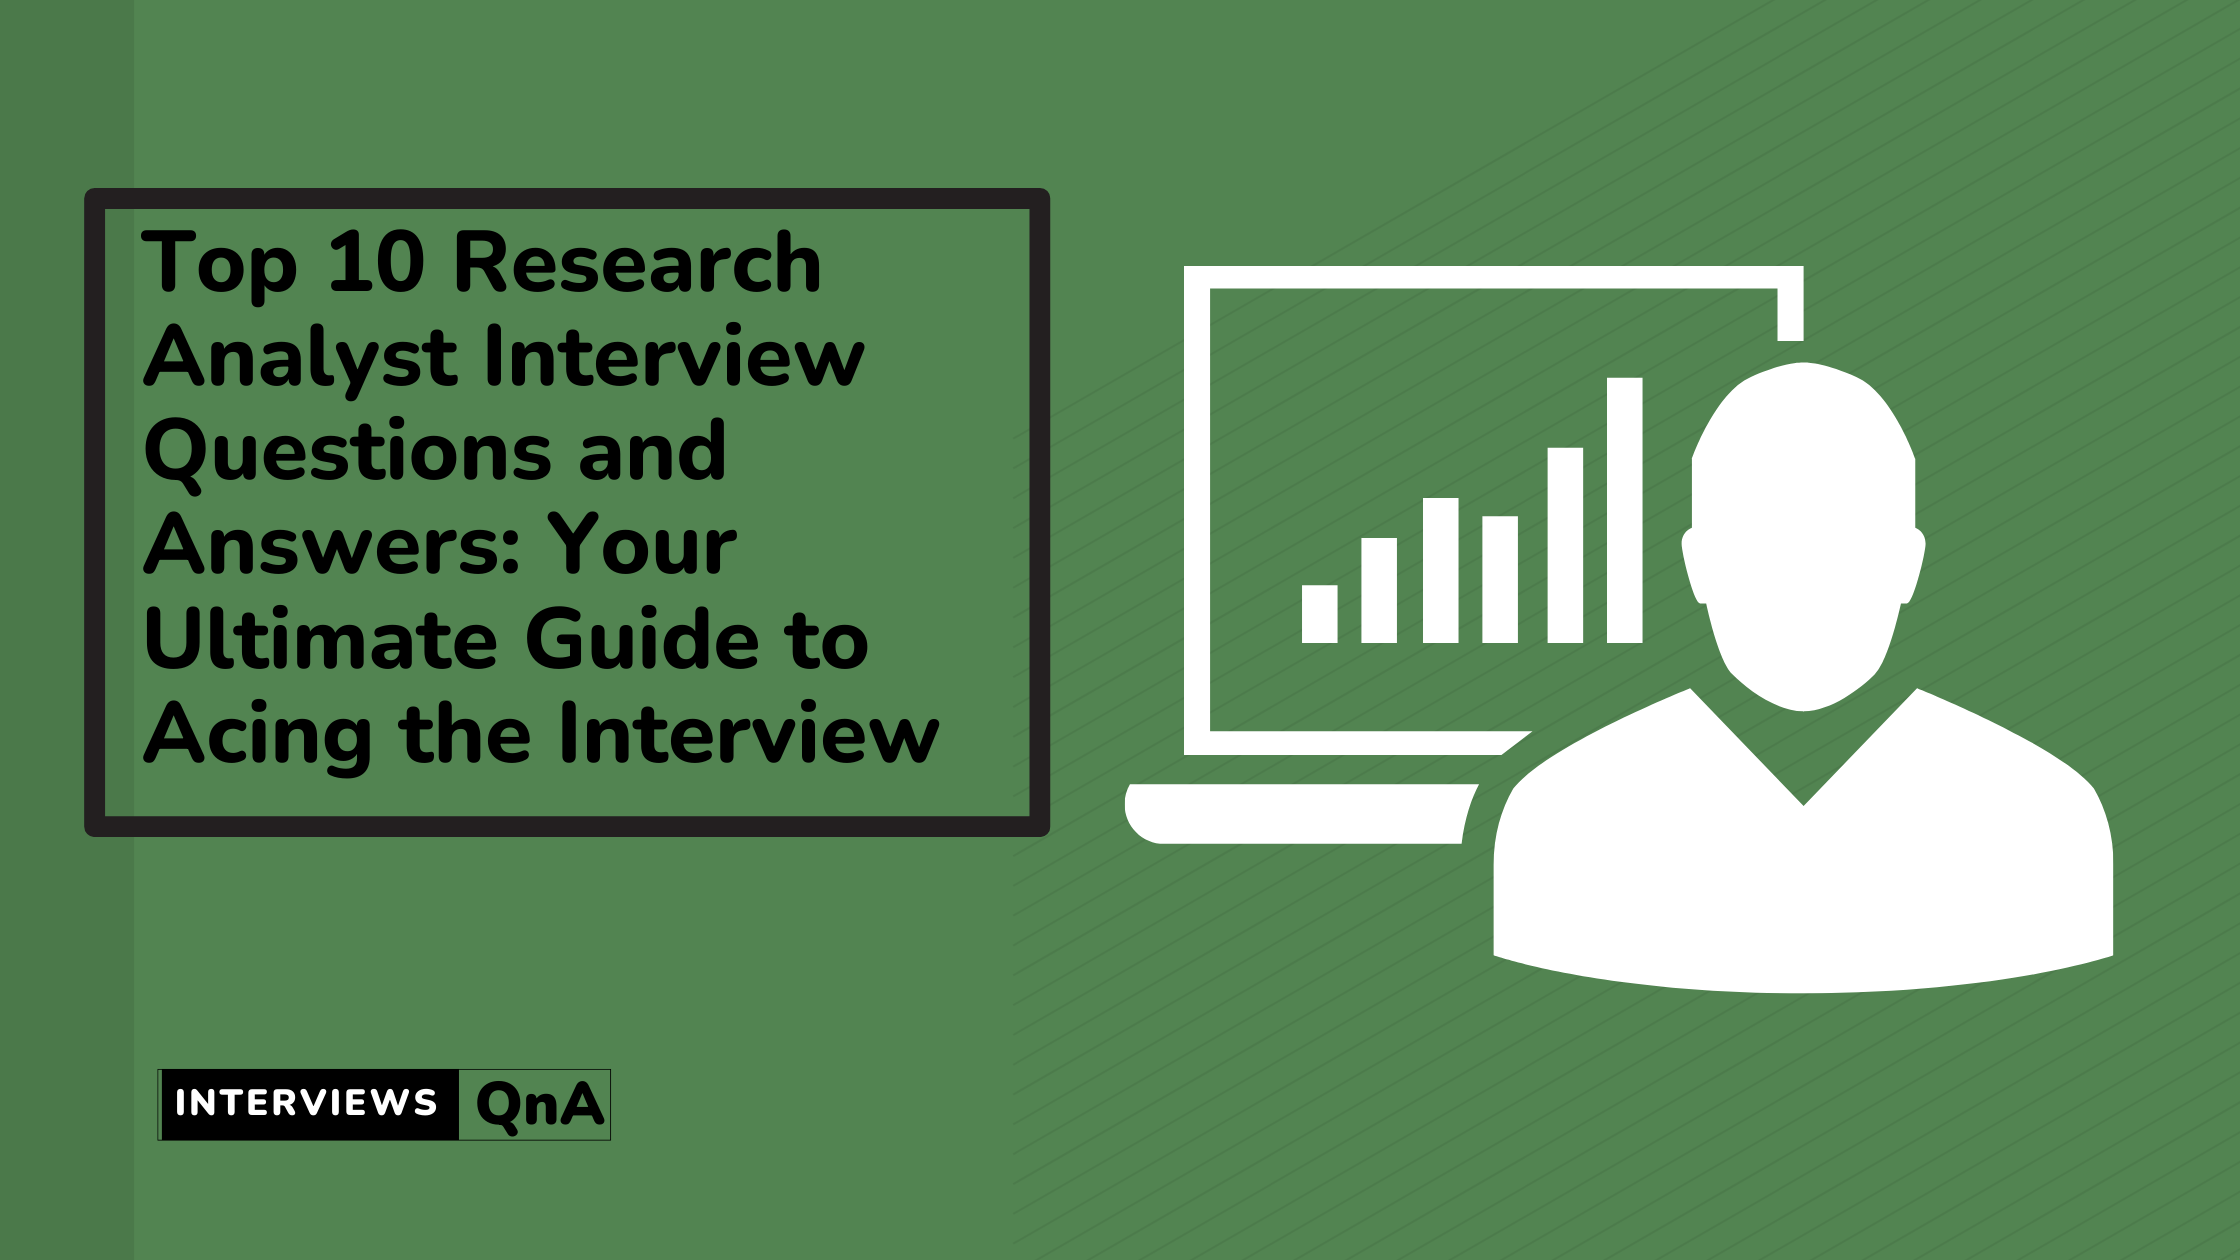 s&p global research analyst interview questions